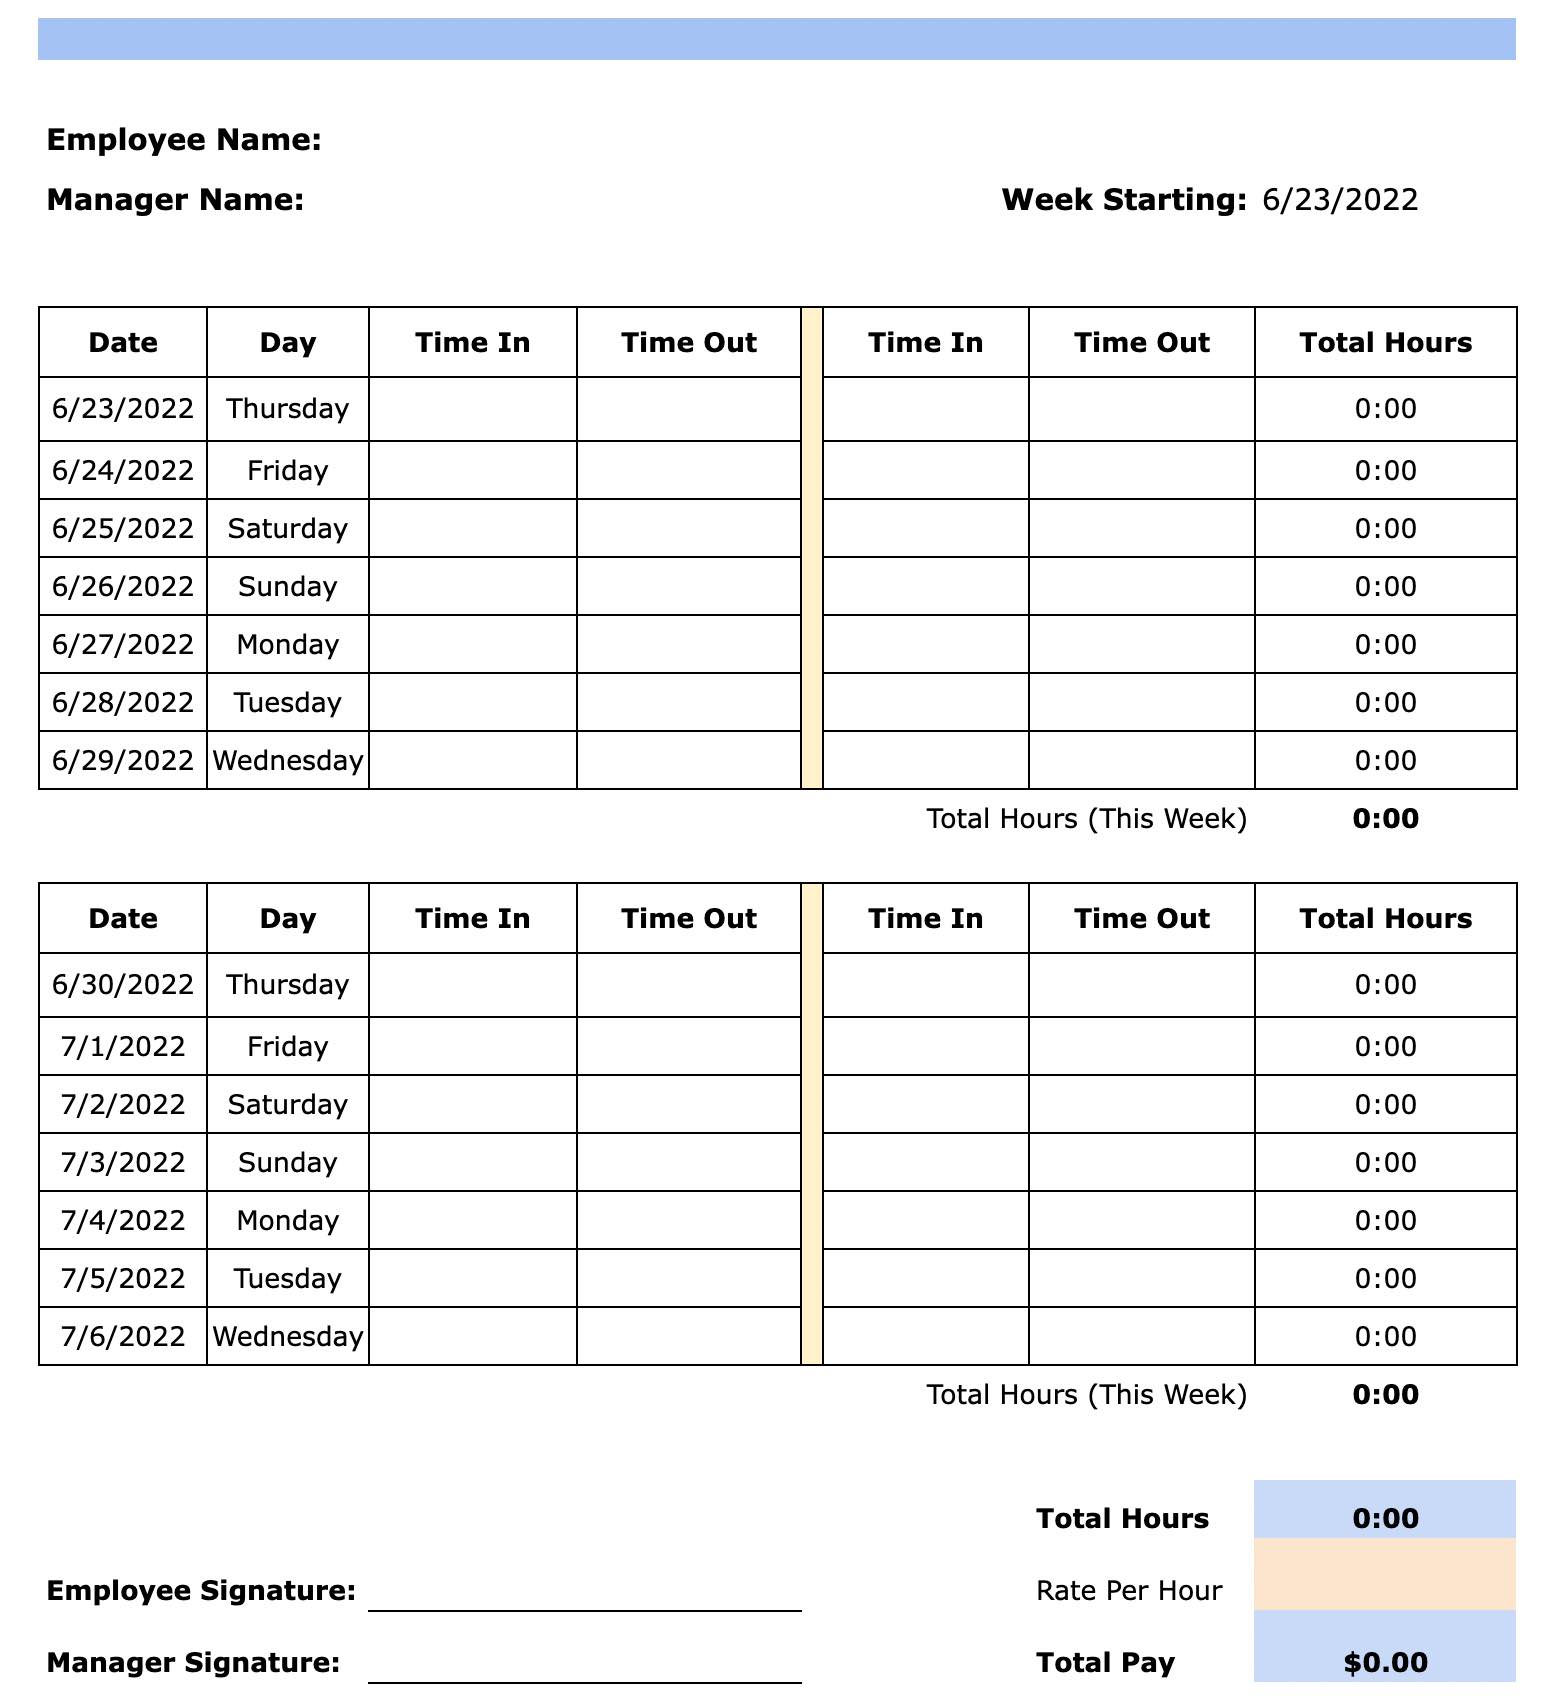 Employee Time Sheets Printable Printable Form, Templates and Letter